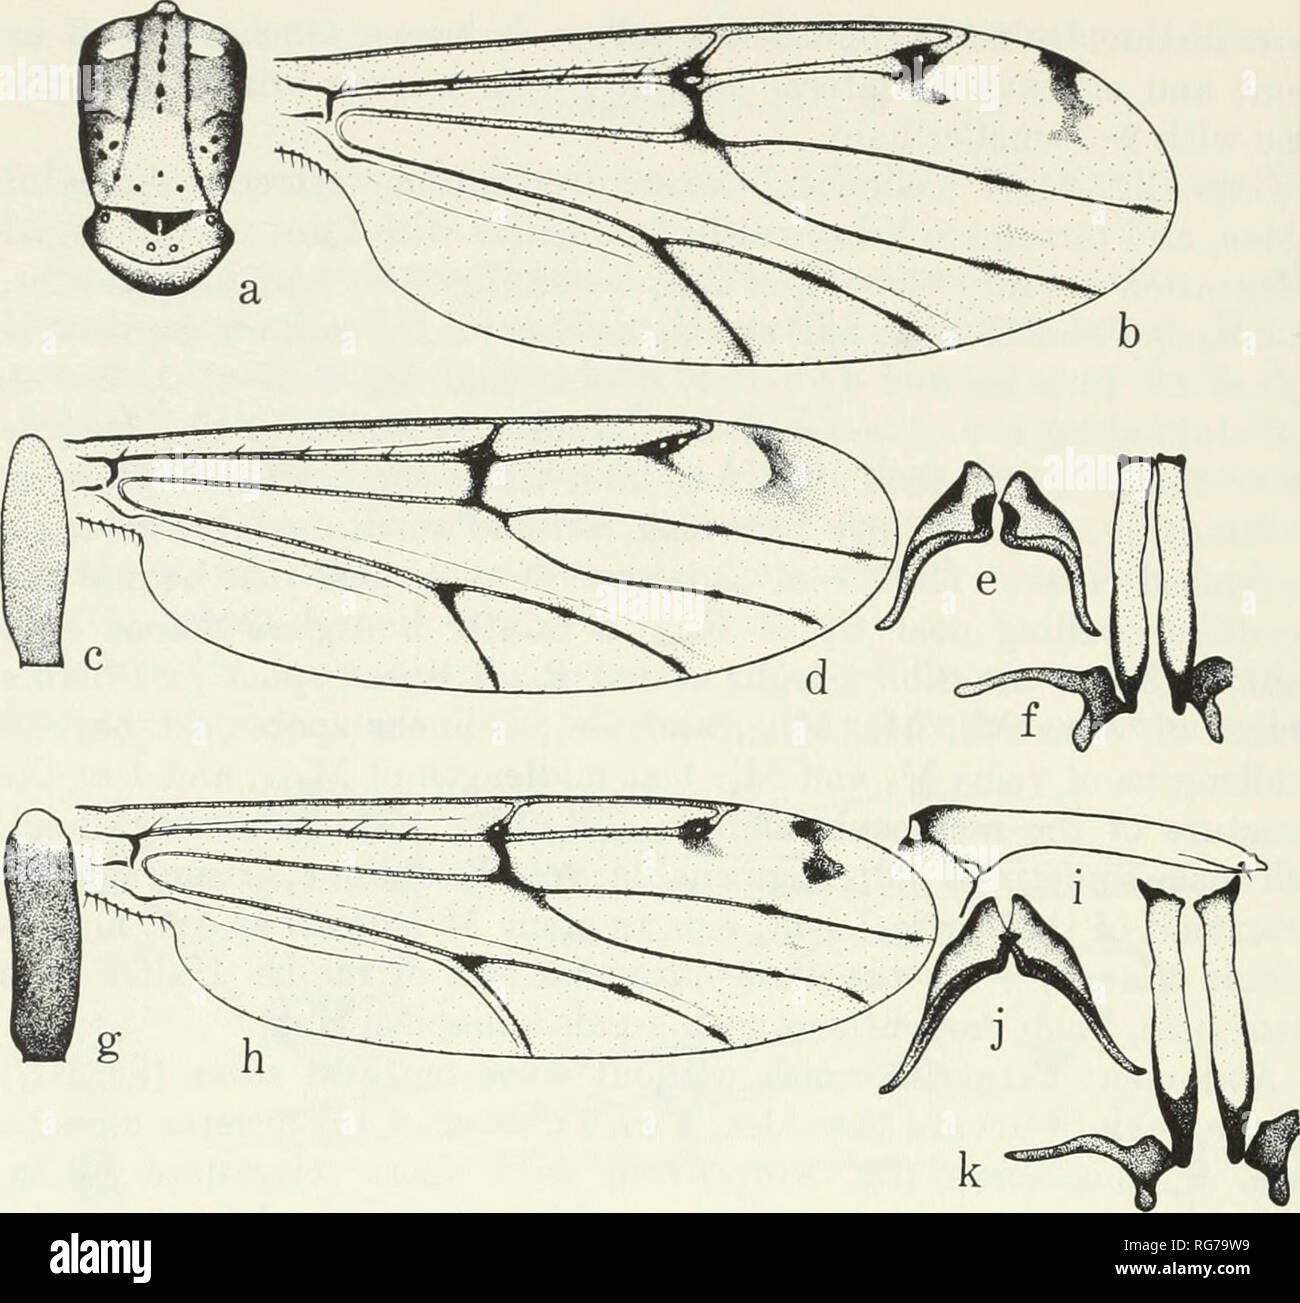 . Bulletin - United States National Museum. Science. 108 U.S. NATIONAL MUSEUM BULLETIN 283. Figure 82.—Stilobezzia punctivenosa, new species, forms 2-4 (a-b, 9 ; c—k, d&quot;). a, thorax, form 2; b, wing, form 2; c, palpal segment V, form 3; d, wing, form 3; e-f, o&quot; genitalia, form 3; g, palpal segment V, form 4; h, wing, form 4; i-&amp;, cf genitalia, form 4. Types.—Holotype male, allotype female, Bangkok Prov., Thonglo Dist., Thailand, Aug.-Sept. 1962, J. Scanlon, light trap (USNM 69477). Paratypes, 12 males, 8 females, same data as types. Discussion.-—-Because of extensive variation in Stock Photo